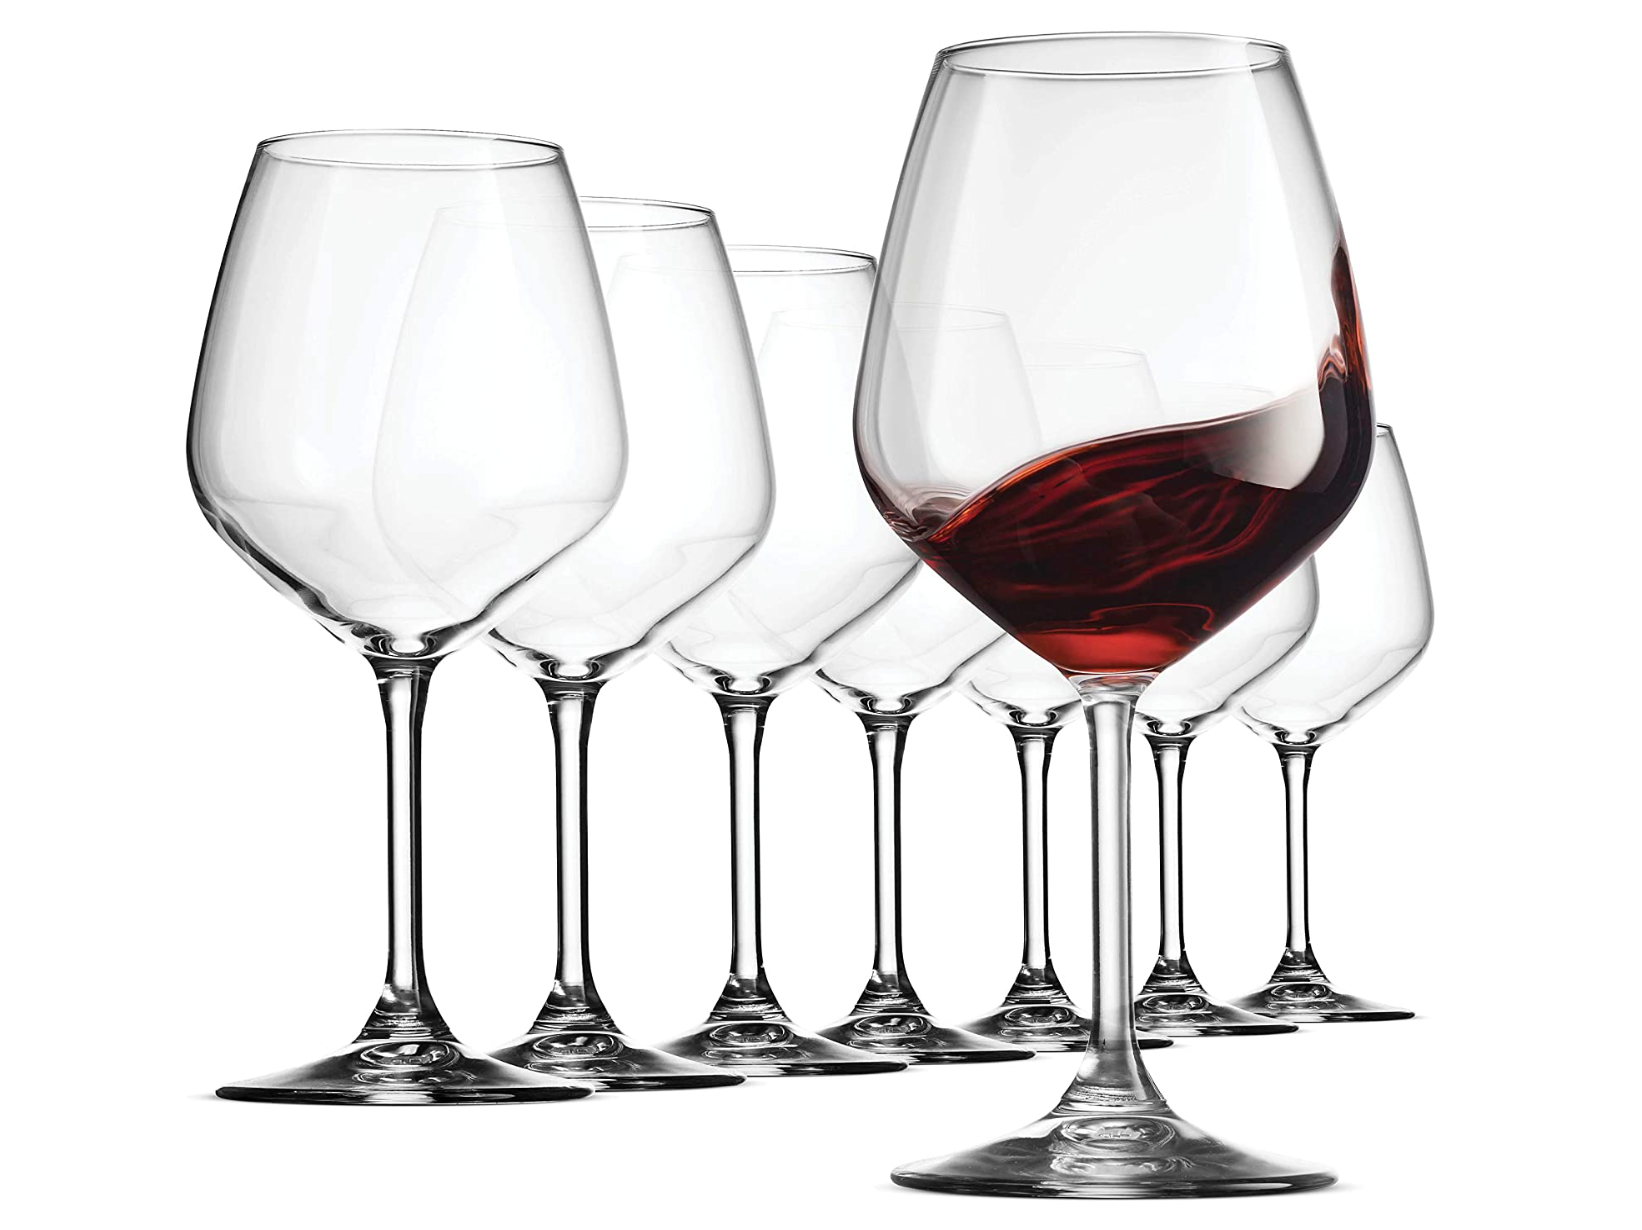 https://www.cuisineathome.com/review/wp-content/uploads/2023/05/Bormioli-Rocco-Red-Wine-Glasses.png